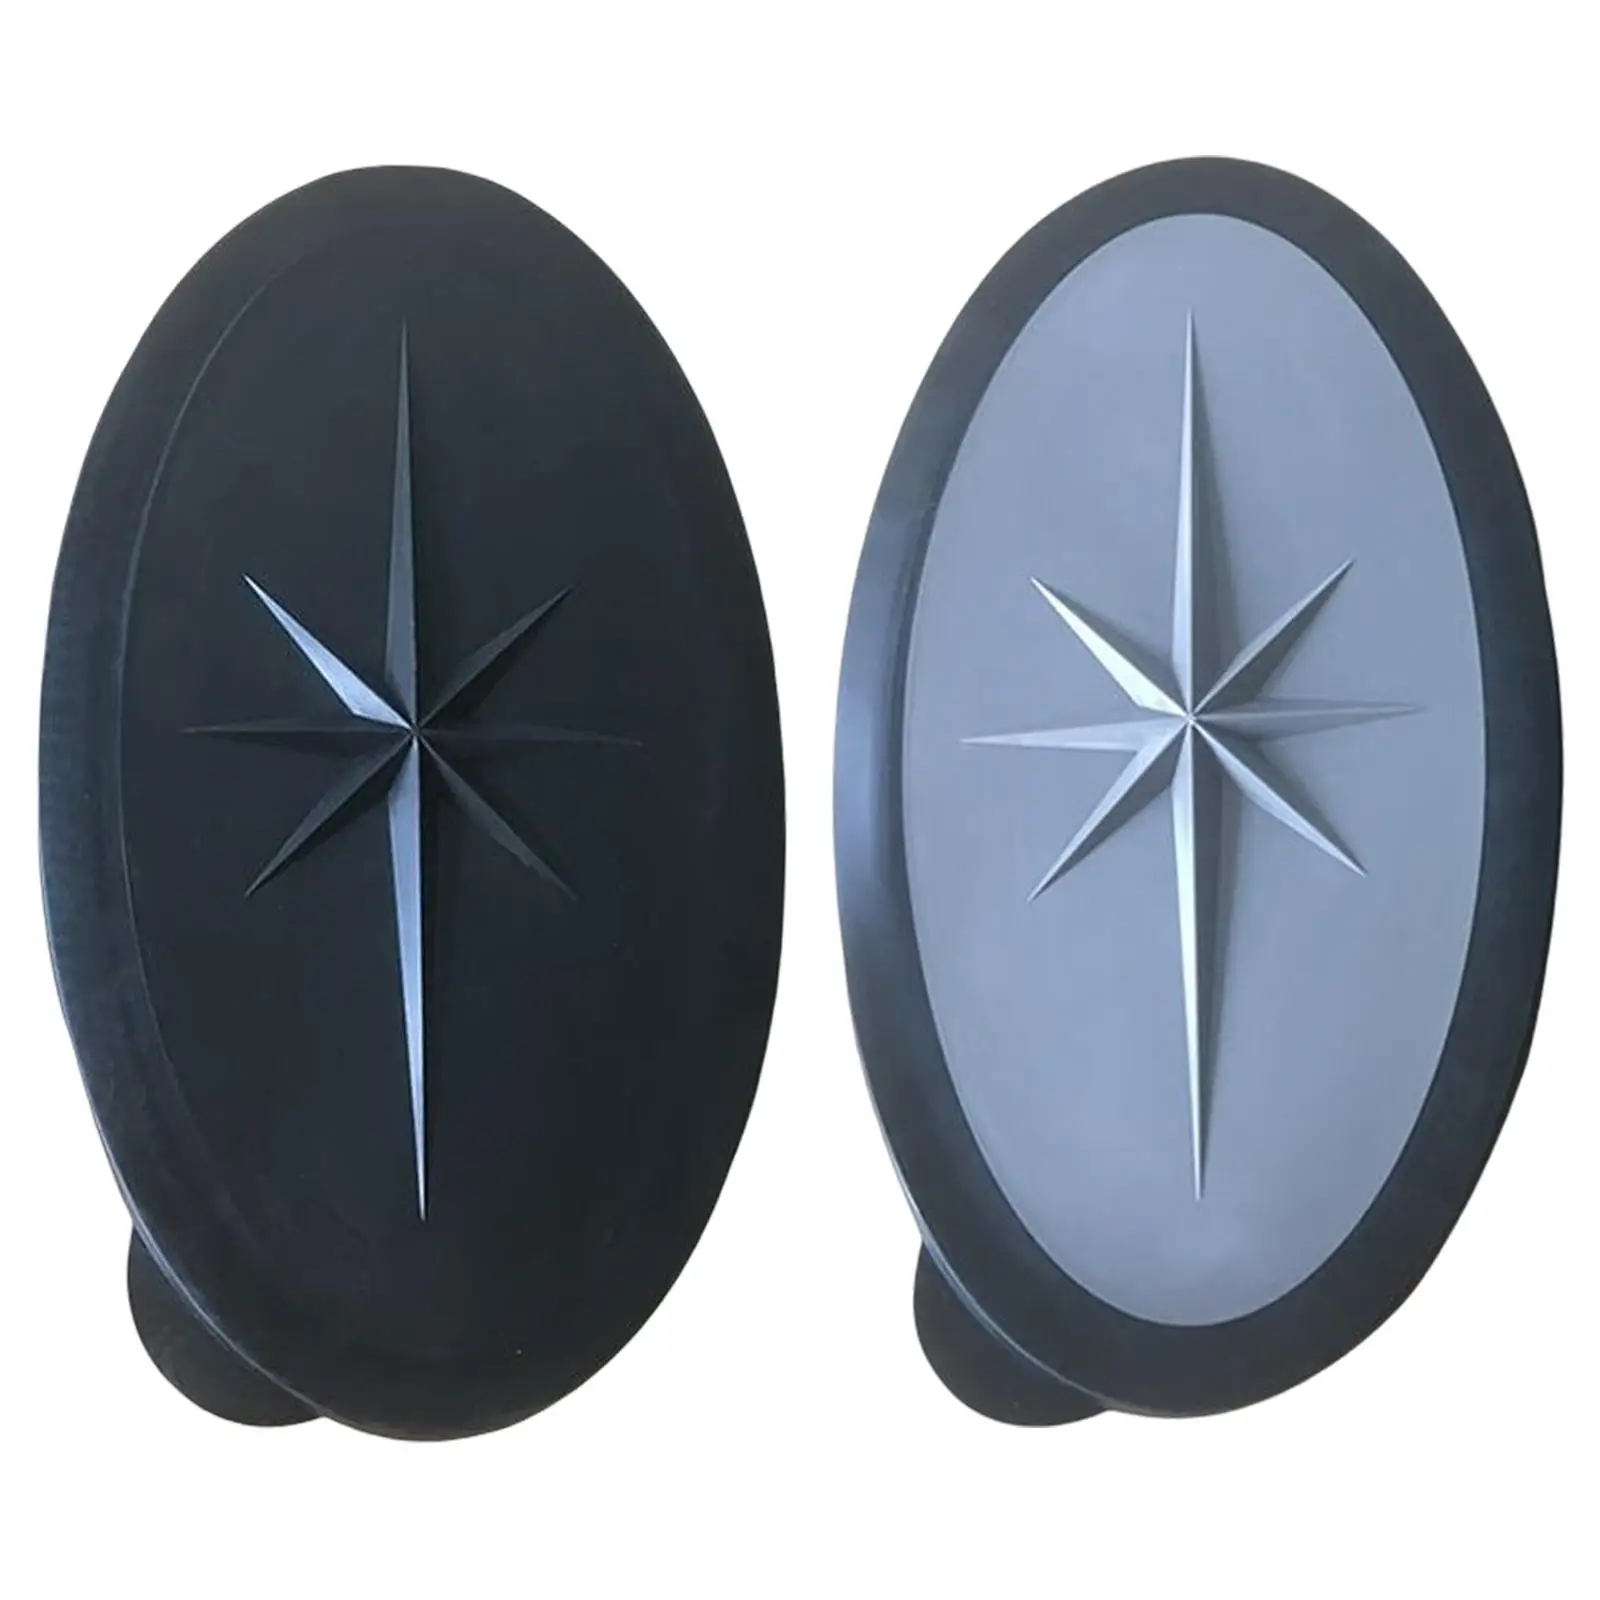 Oval Hatch Cover Boat Accessories Plastic Deck Kayak for Water Sport Yacht